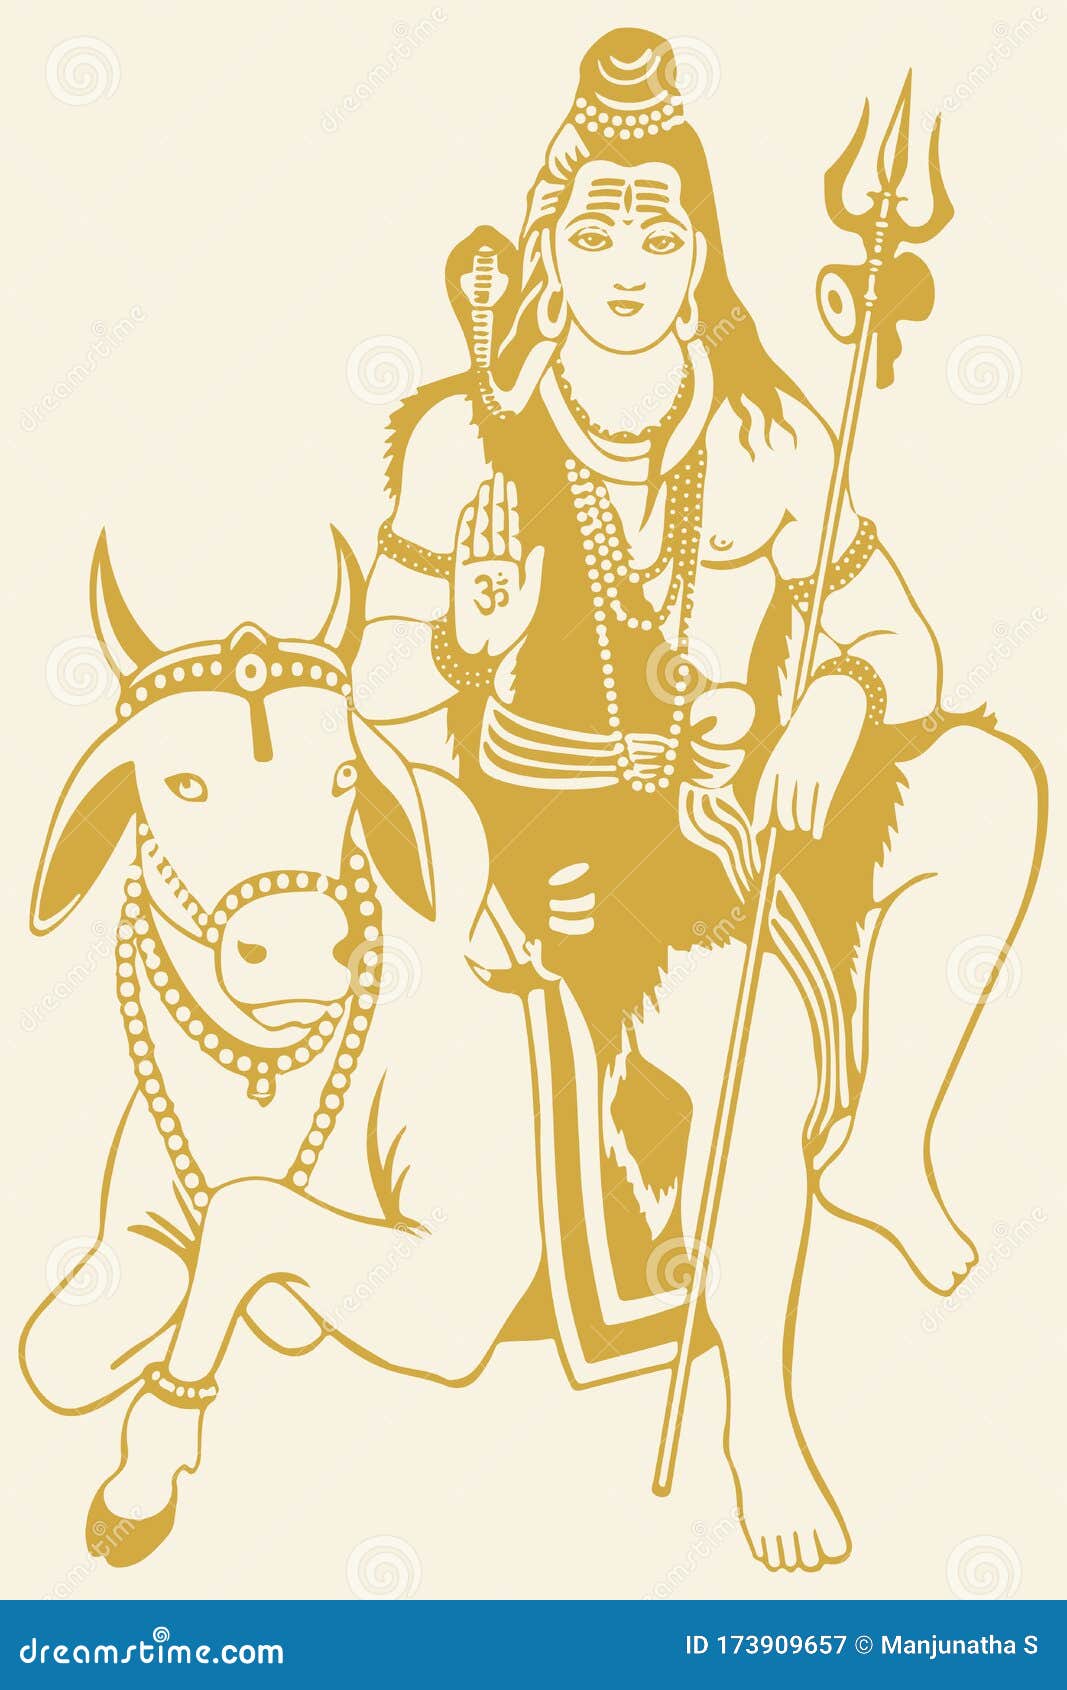 Drawing or Sketch of Lord Shiva Sitting Above Nandi. Vector ...